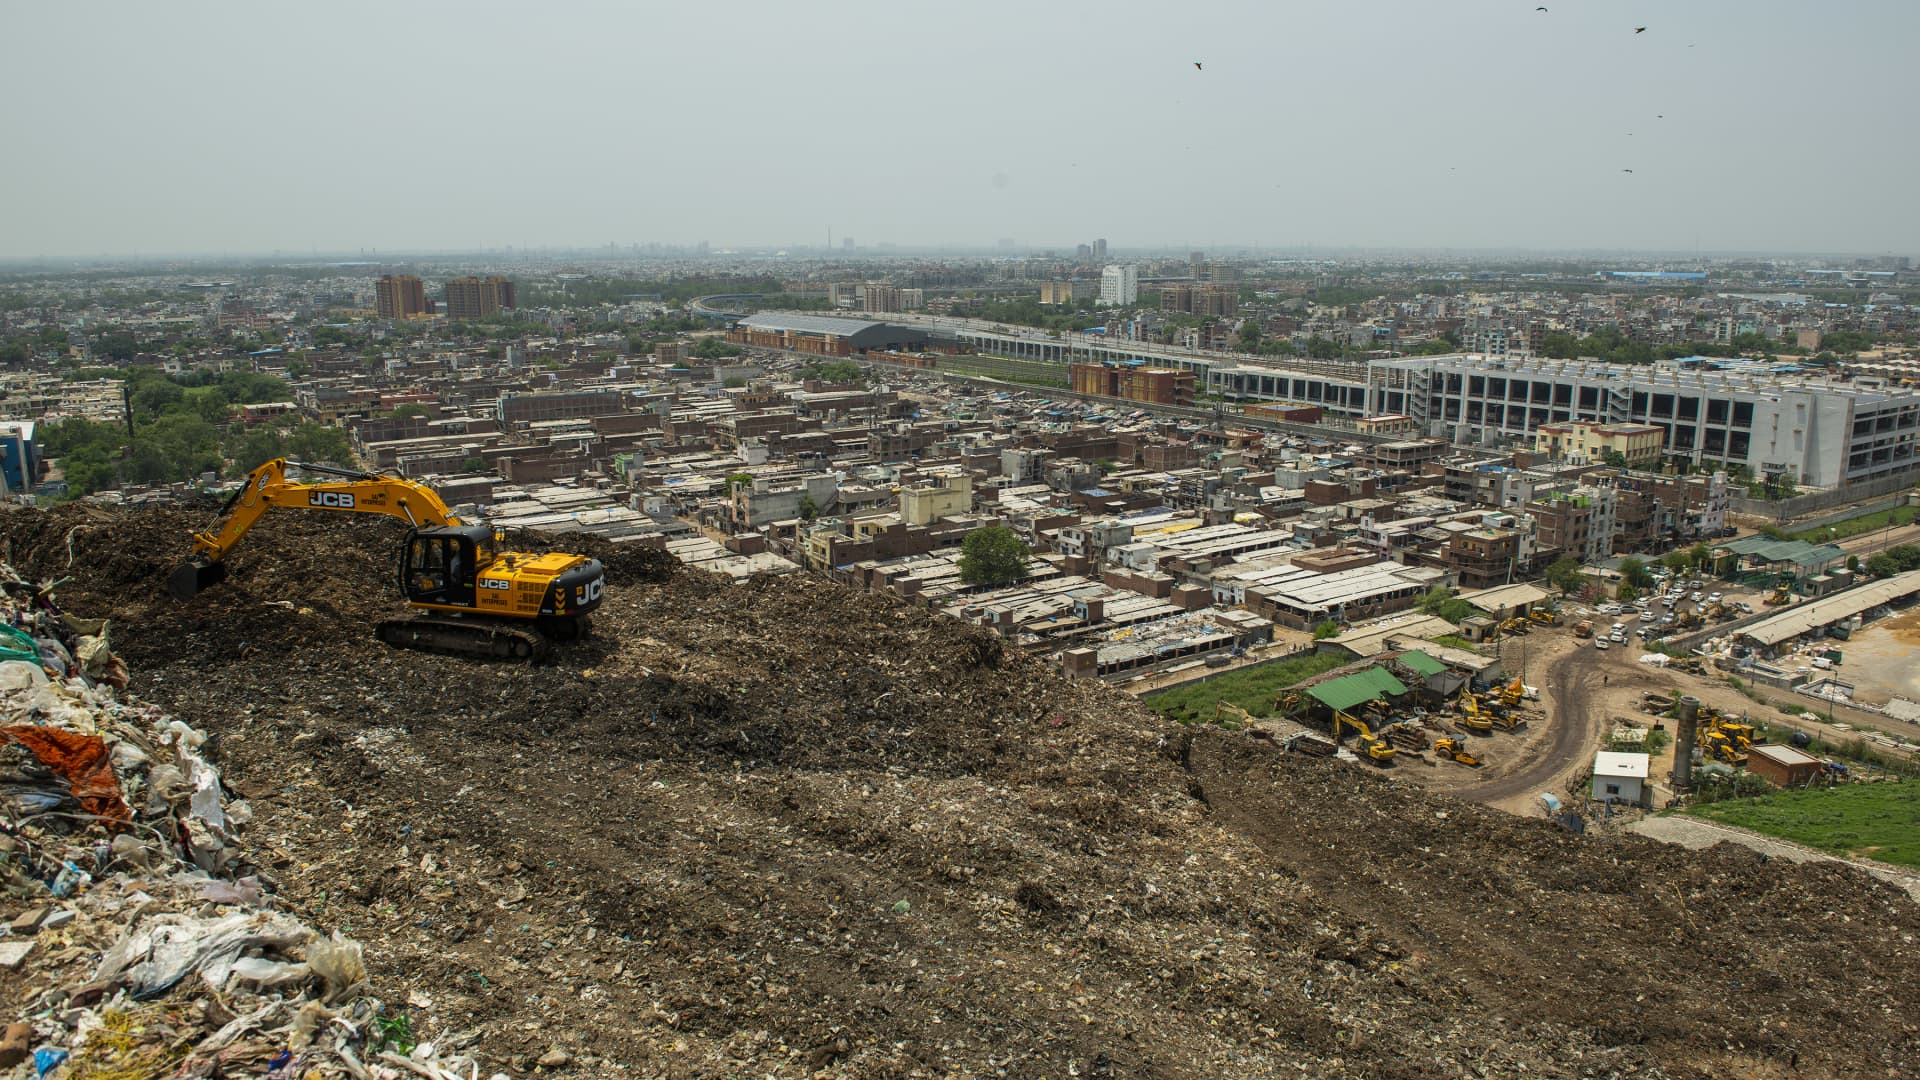 A machine picking up waste in the pile of garbage at the Ghazipur land fill site where city's daily waste has been dumped for last 35 years. The machine separates waste into three parts first stone and heavy concrete material second plastic, polythene and third is fertilizer and soils.